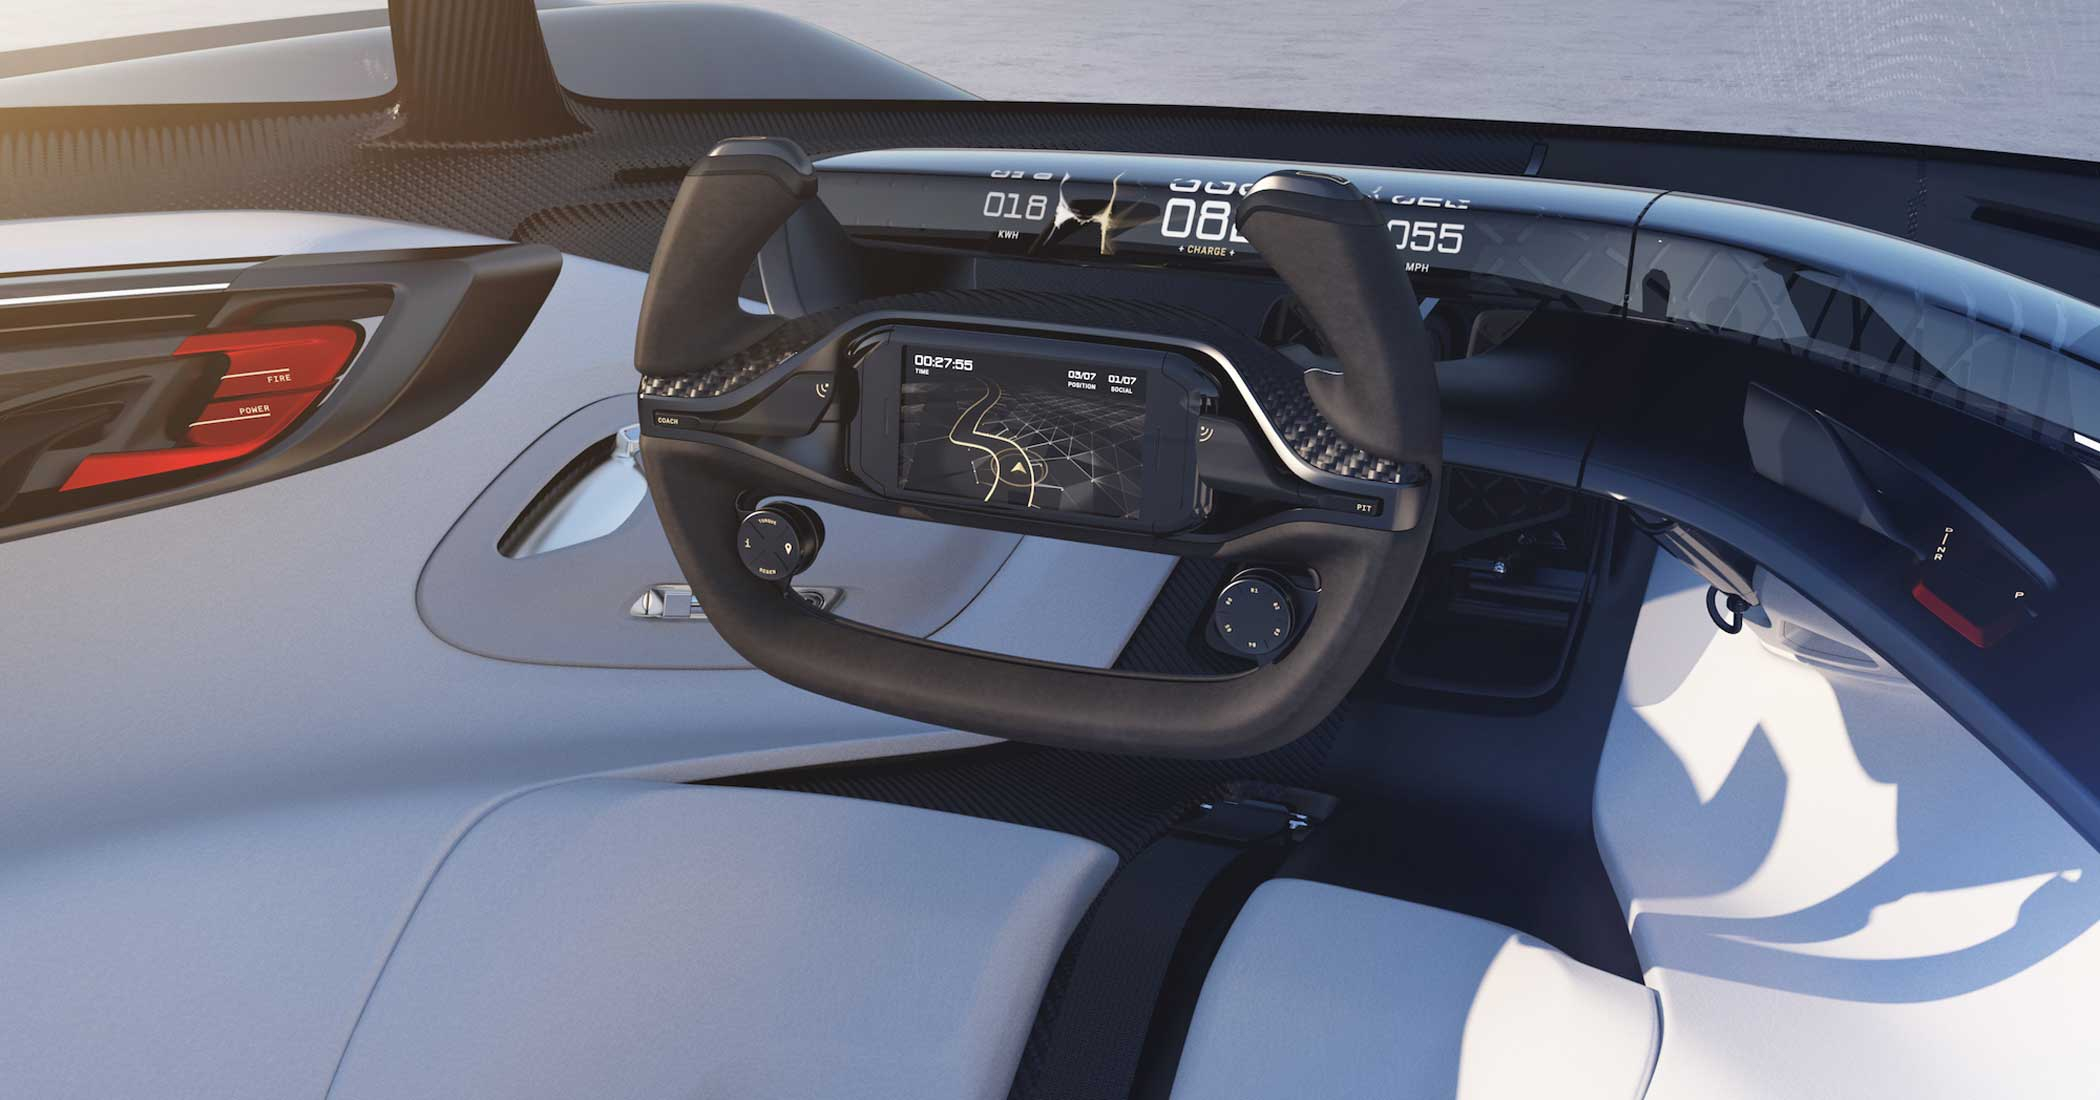 The designs show a GPS embedded in the steering wheel.